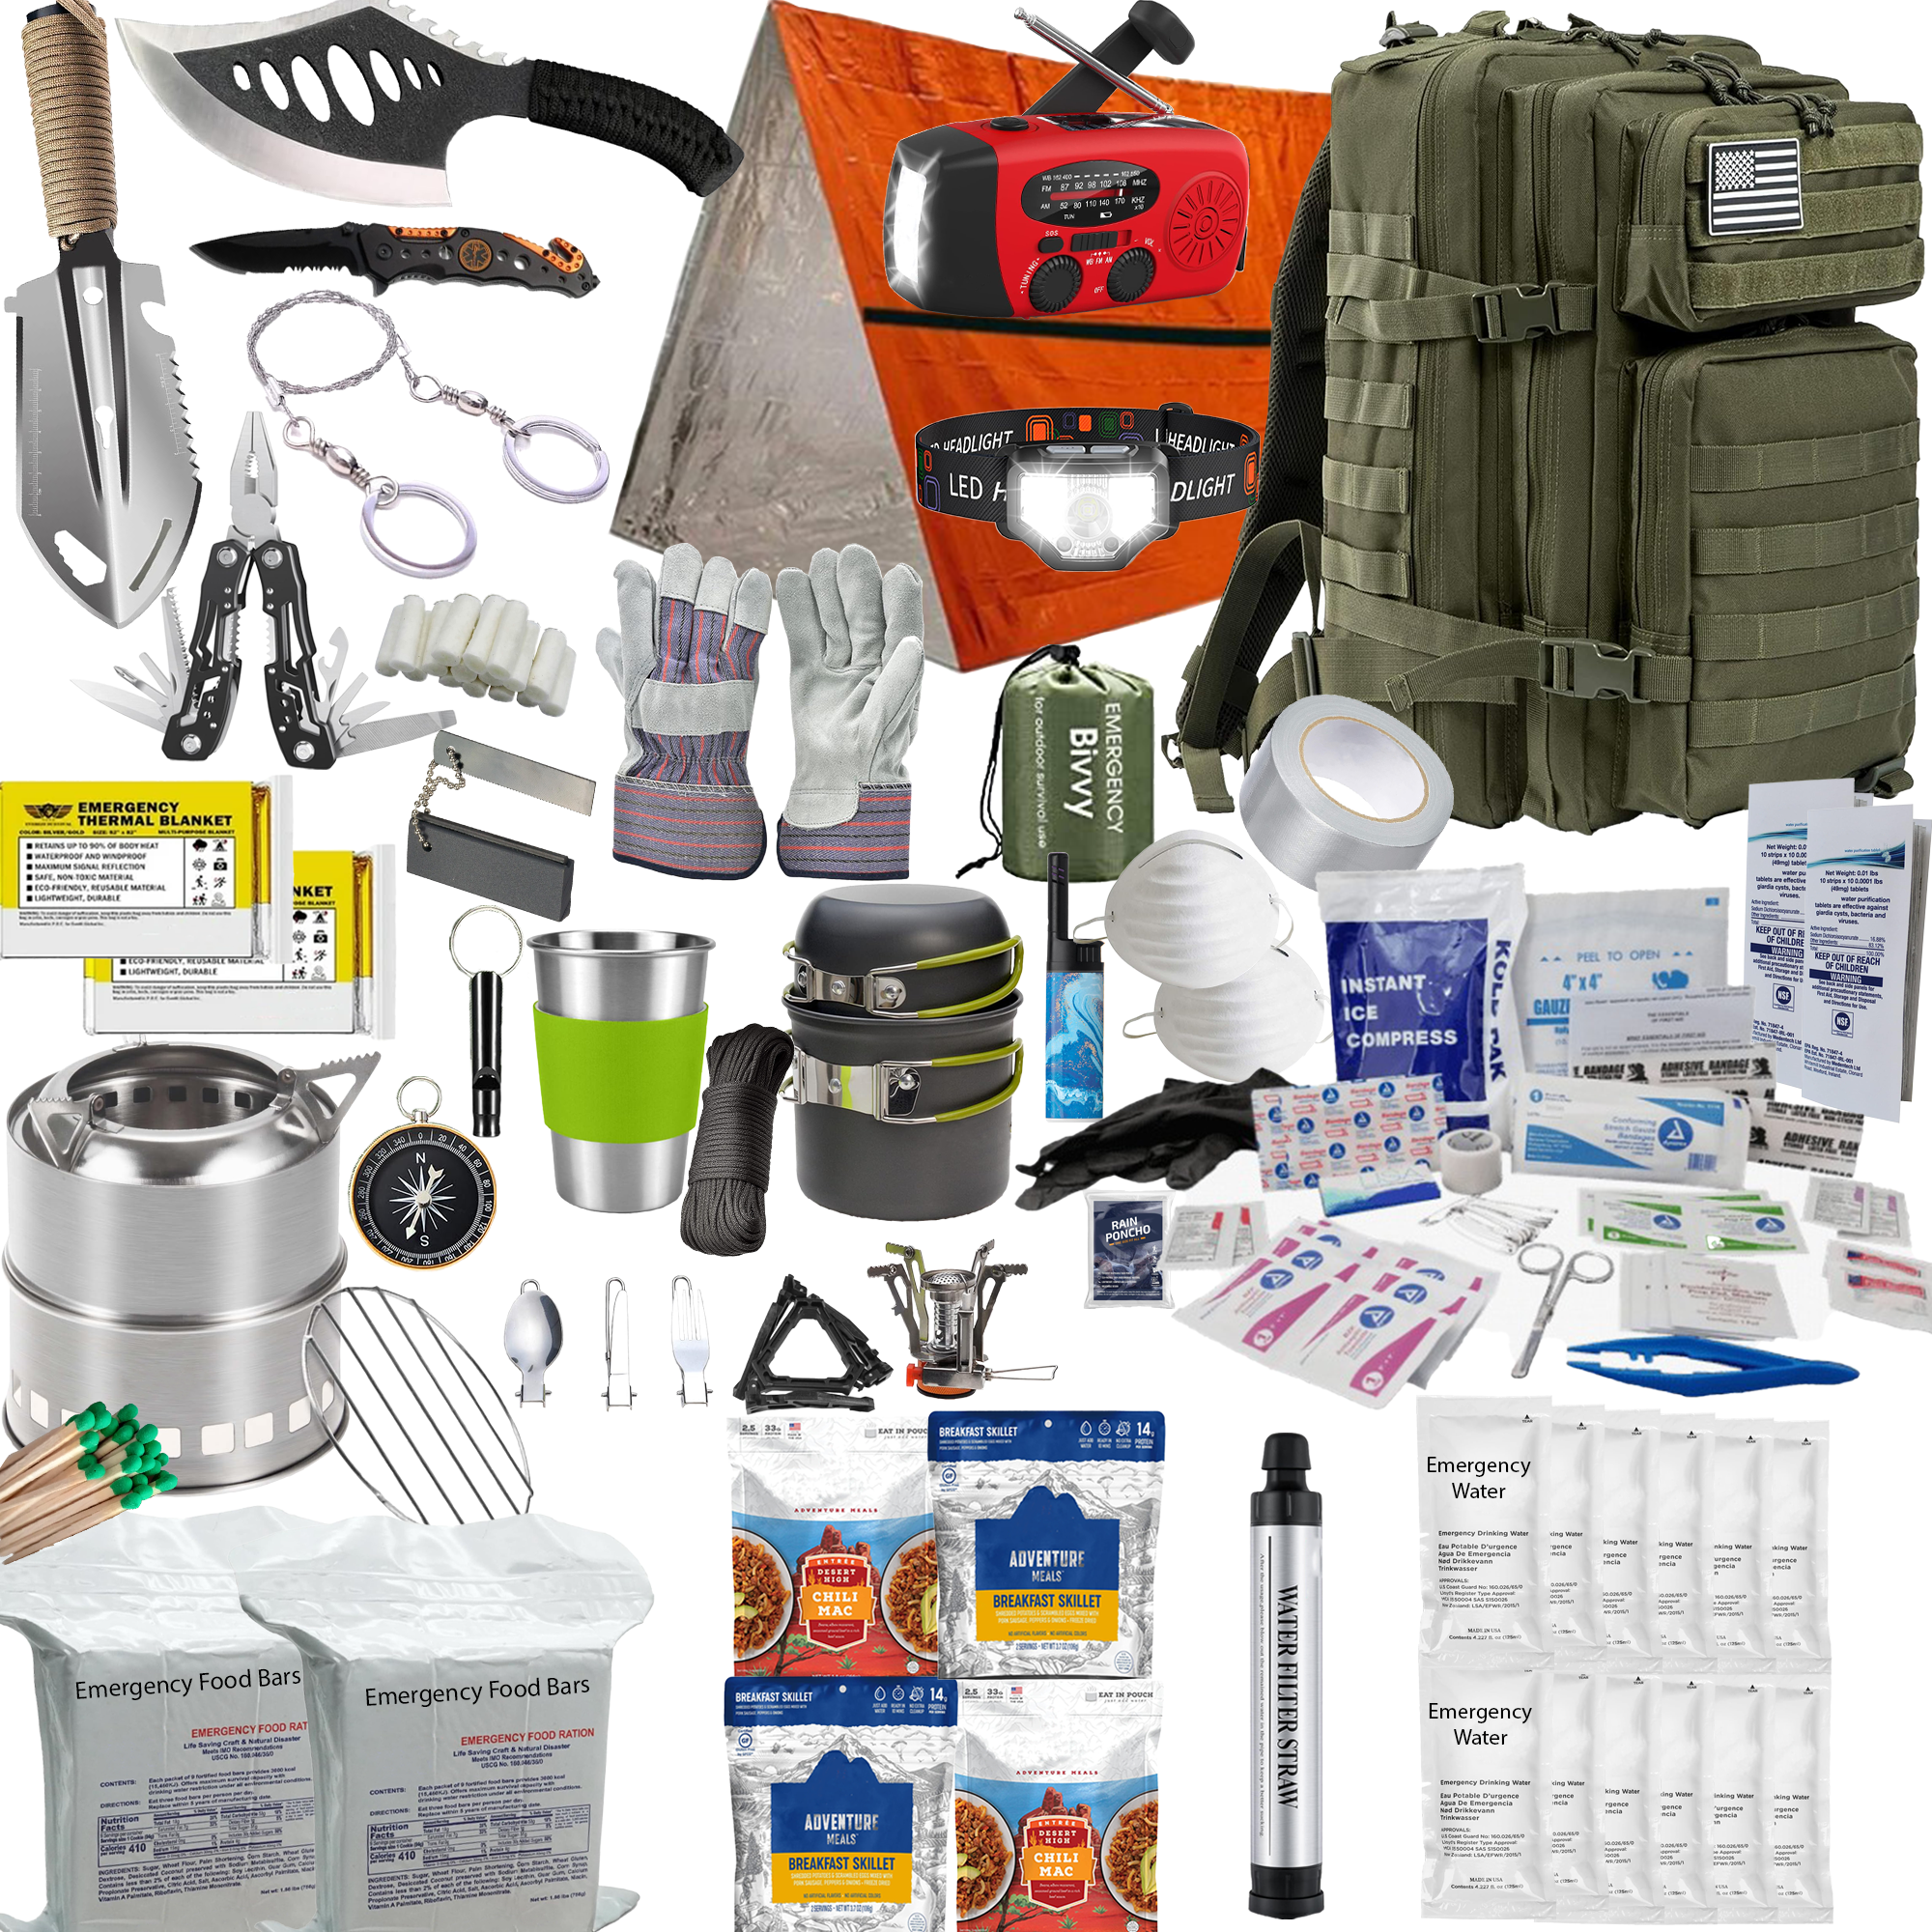 Complete 72 Hour Fully Loaded Bug Out Bag - Emergency Survival Kit - Get Home Bag - Go Bag Emergency Backpack for Earthquake, Disaster, Preparedness - Bugout Gear, Doomsday Preppers Supplies